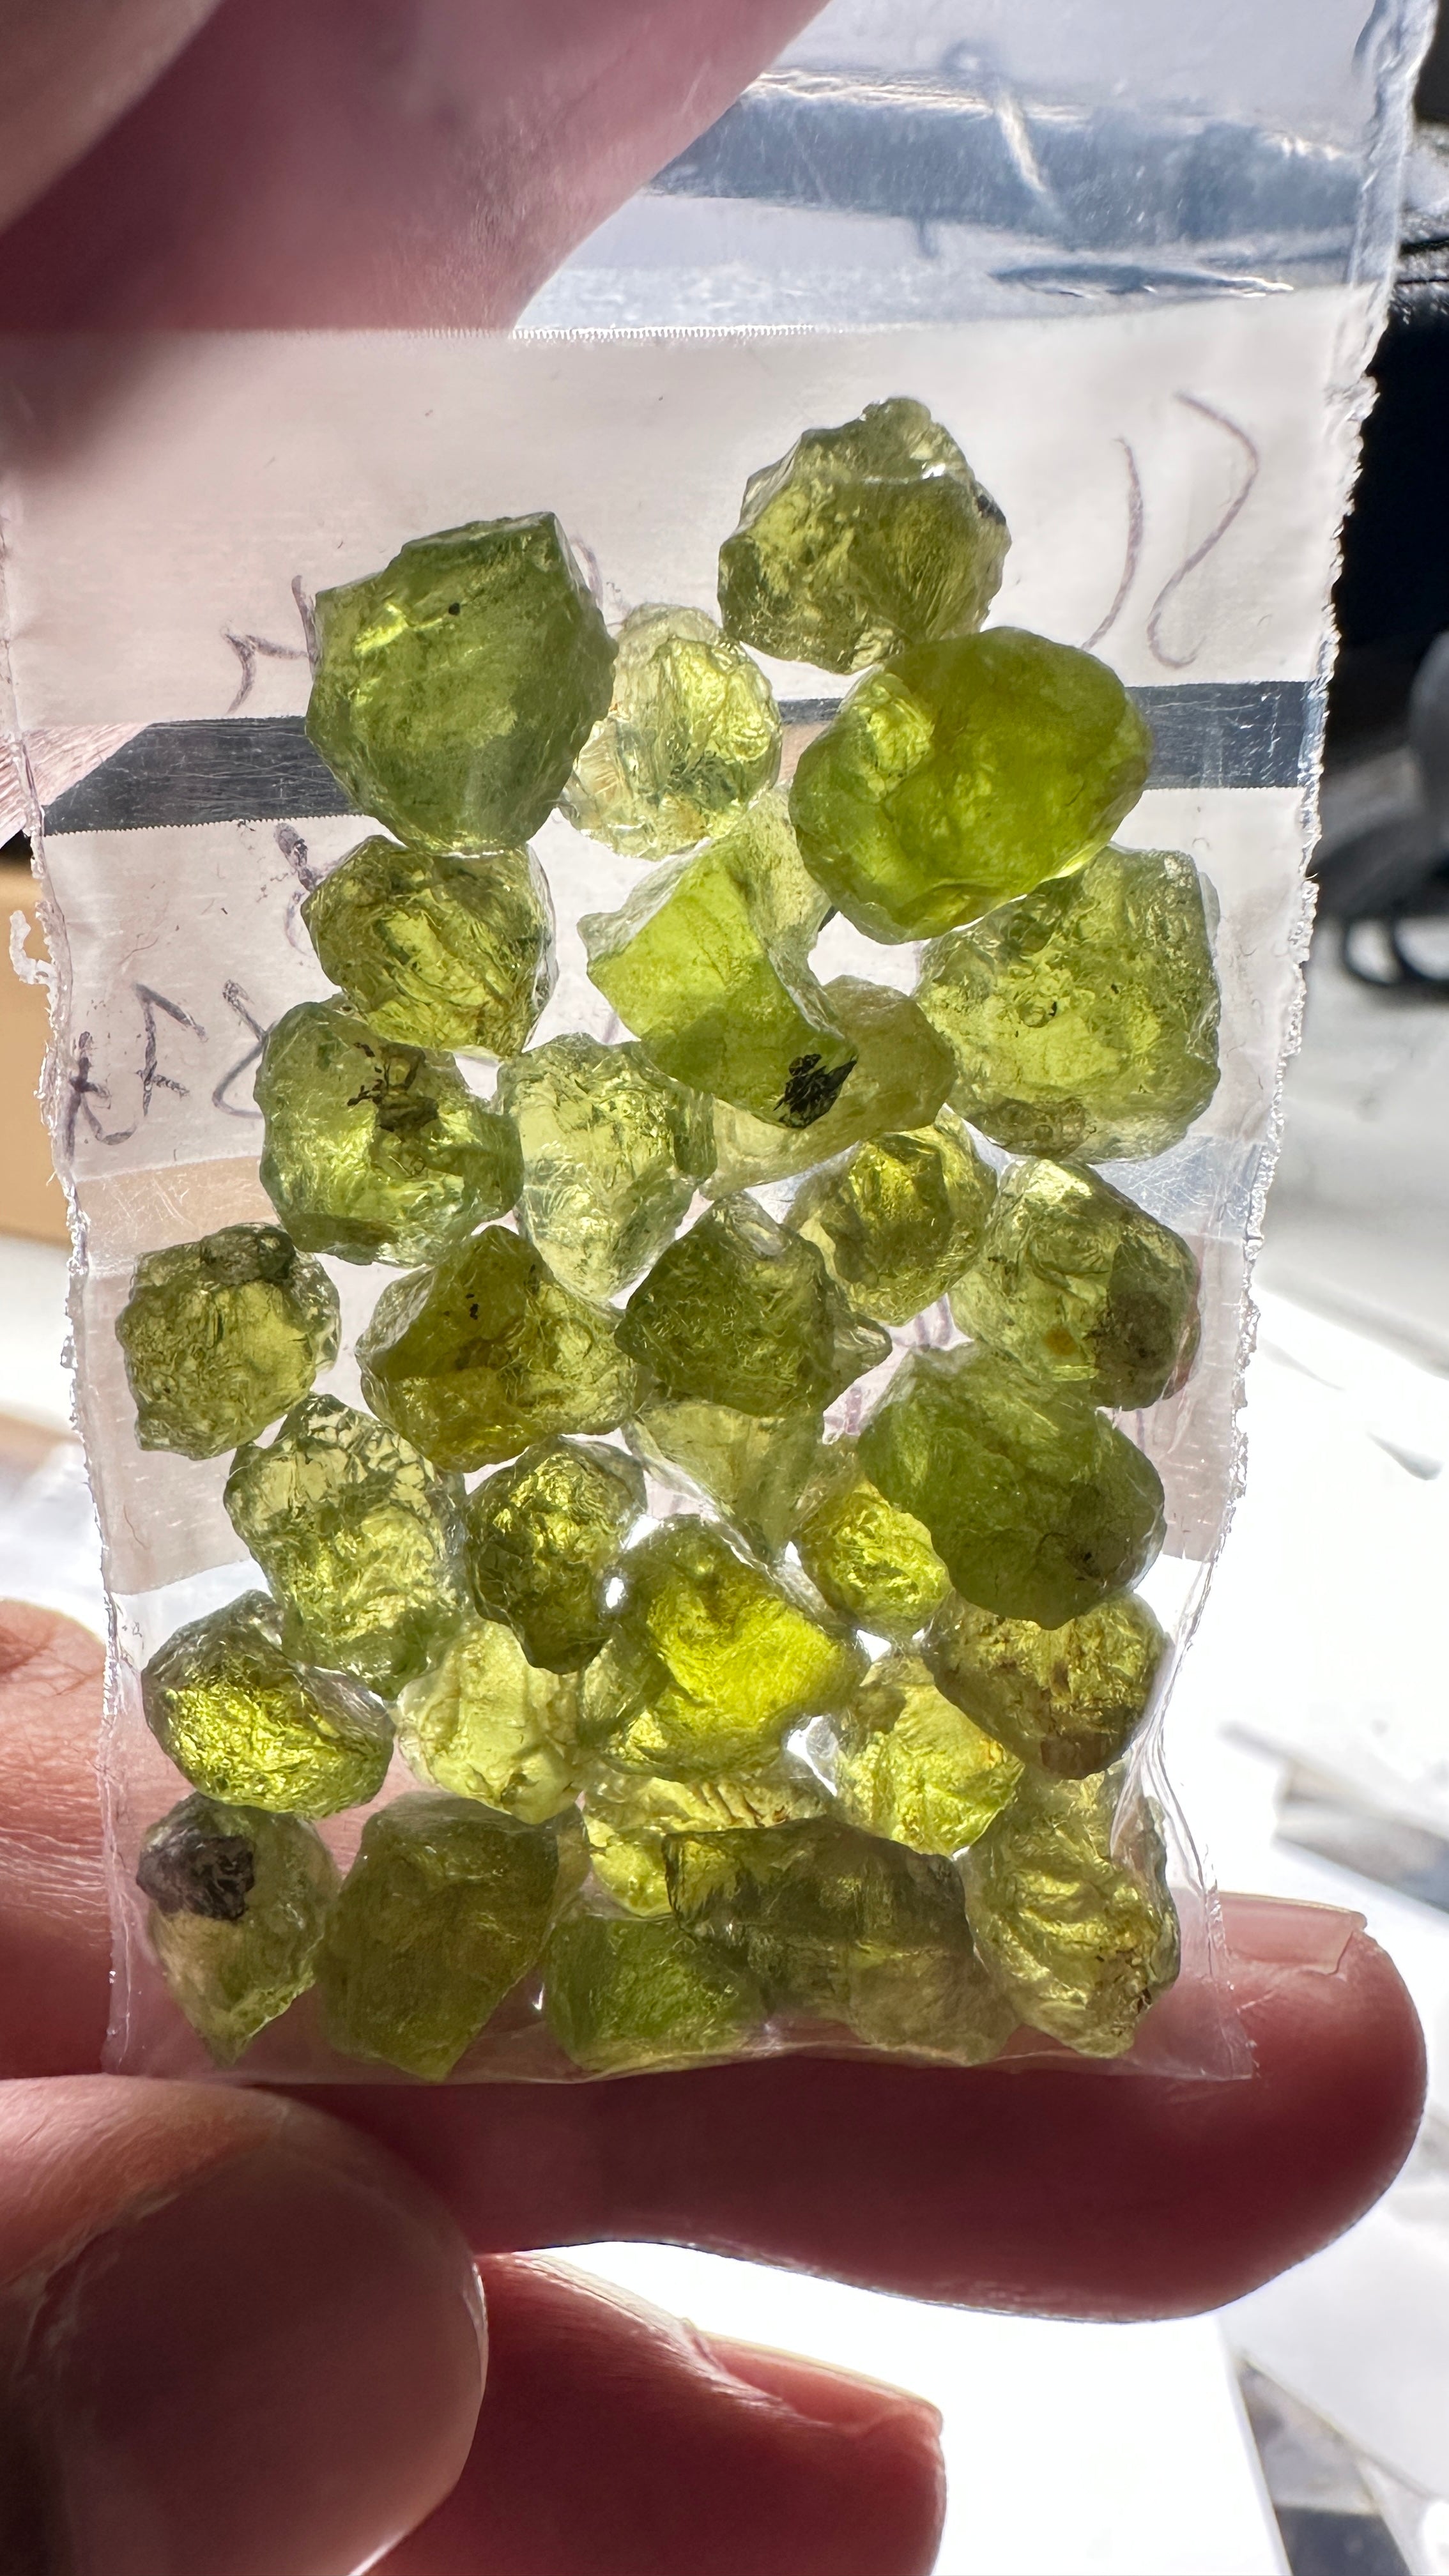 84.40Ct Ethiopian Peridot. 1.58Ct To 4.78. Slight Moderate Inclusions